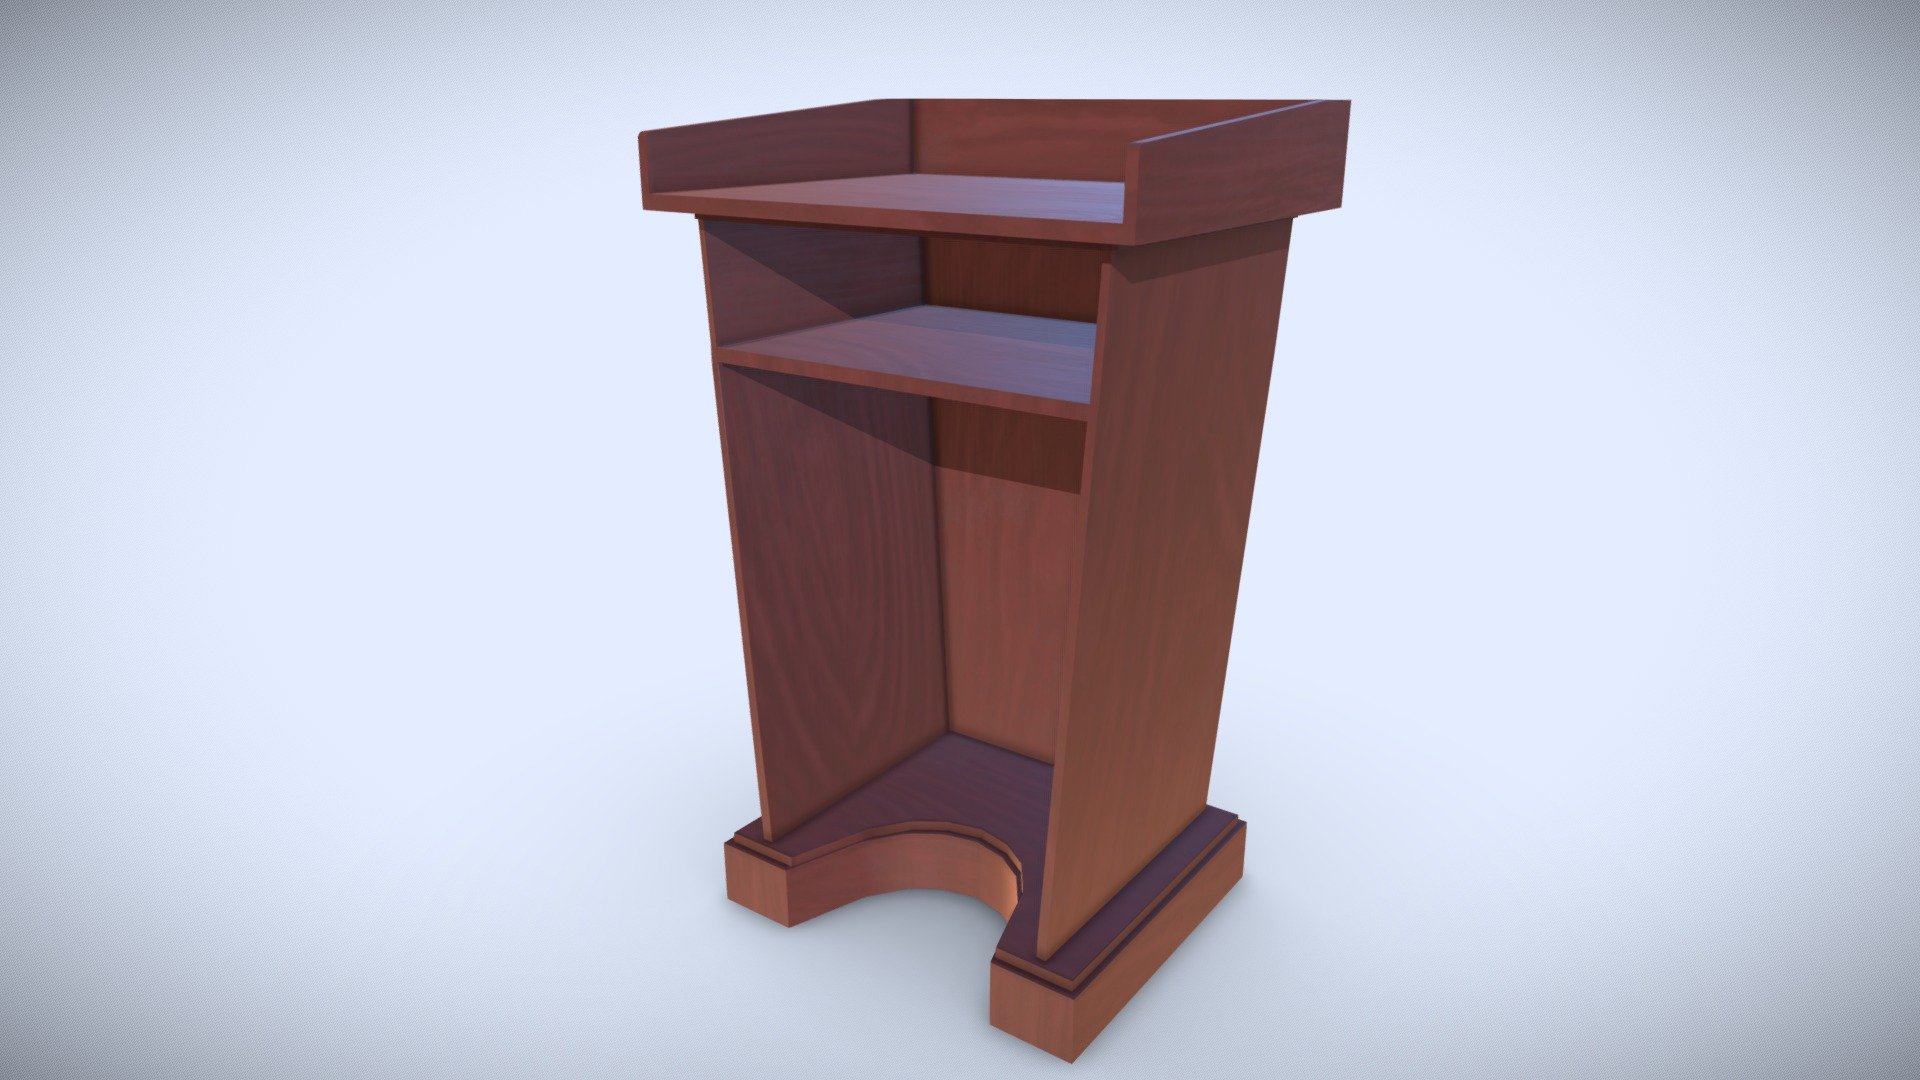 This 3D model is a Pulpit or lectern

Made in Blender 2.8
3D Modeling of a Pulpit o lectern
File format included - (Blend, FBX, OBJ, STL, Alembic, Collada )
Textures of 3D model 4k (Base Color, Normal Map, Roughness Map, AO)
Uvs non - overlapping
Polygon: Quads
Low poly
PBR
Centered at 0,0,0
Textures, materials and objects are logically named for ease of scene management
No special plugin needed to open scene 3d model